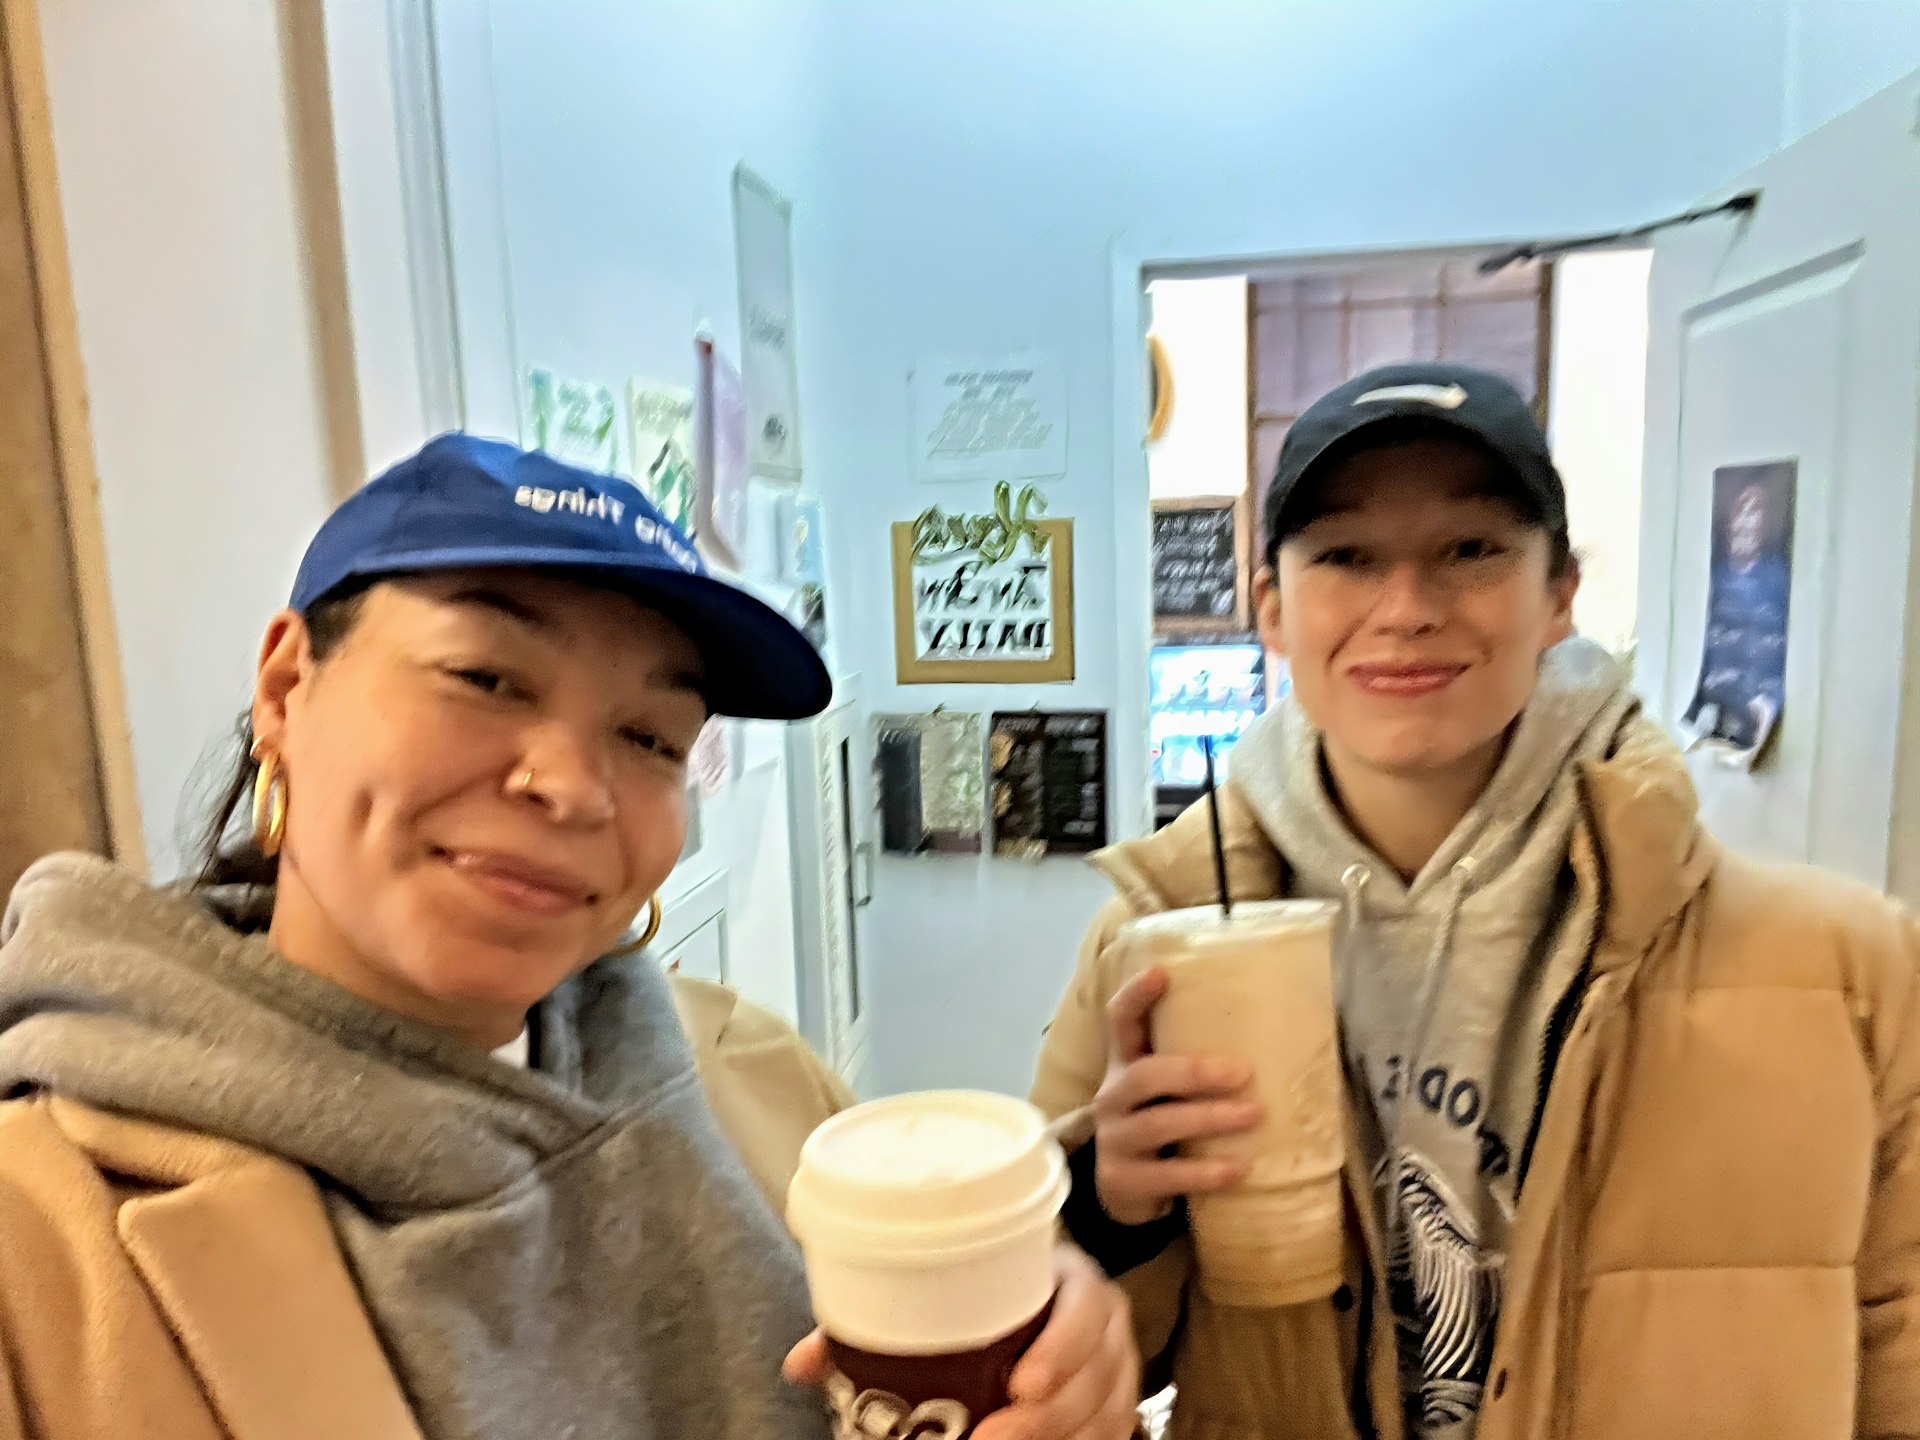 The article's author, Rachel, and her wife pose with coffees in a cafe in Providence